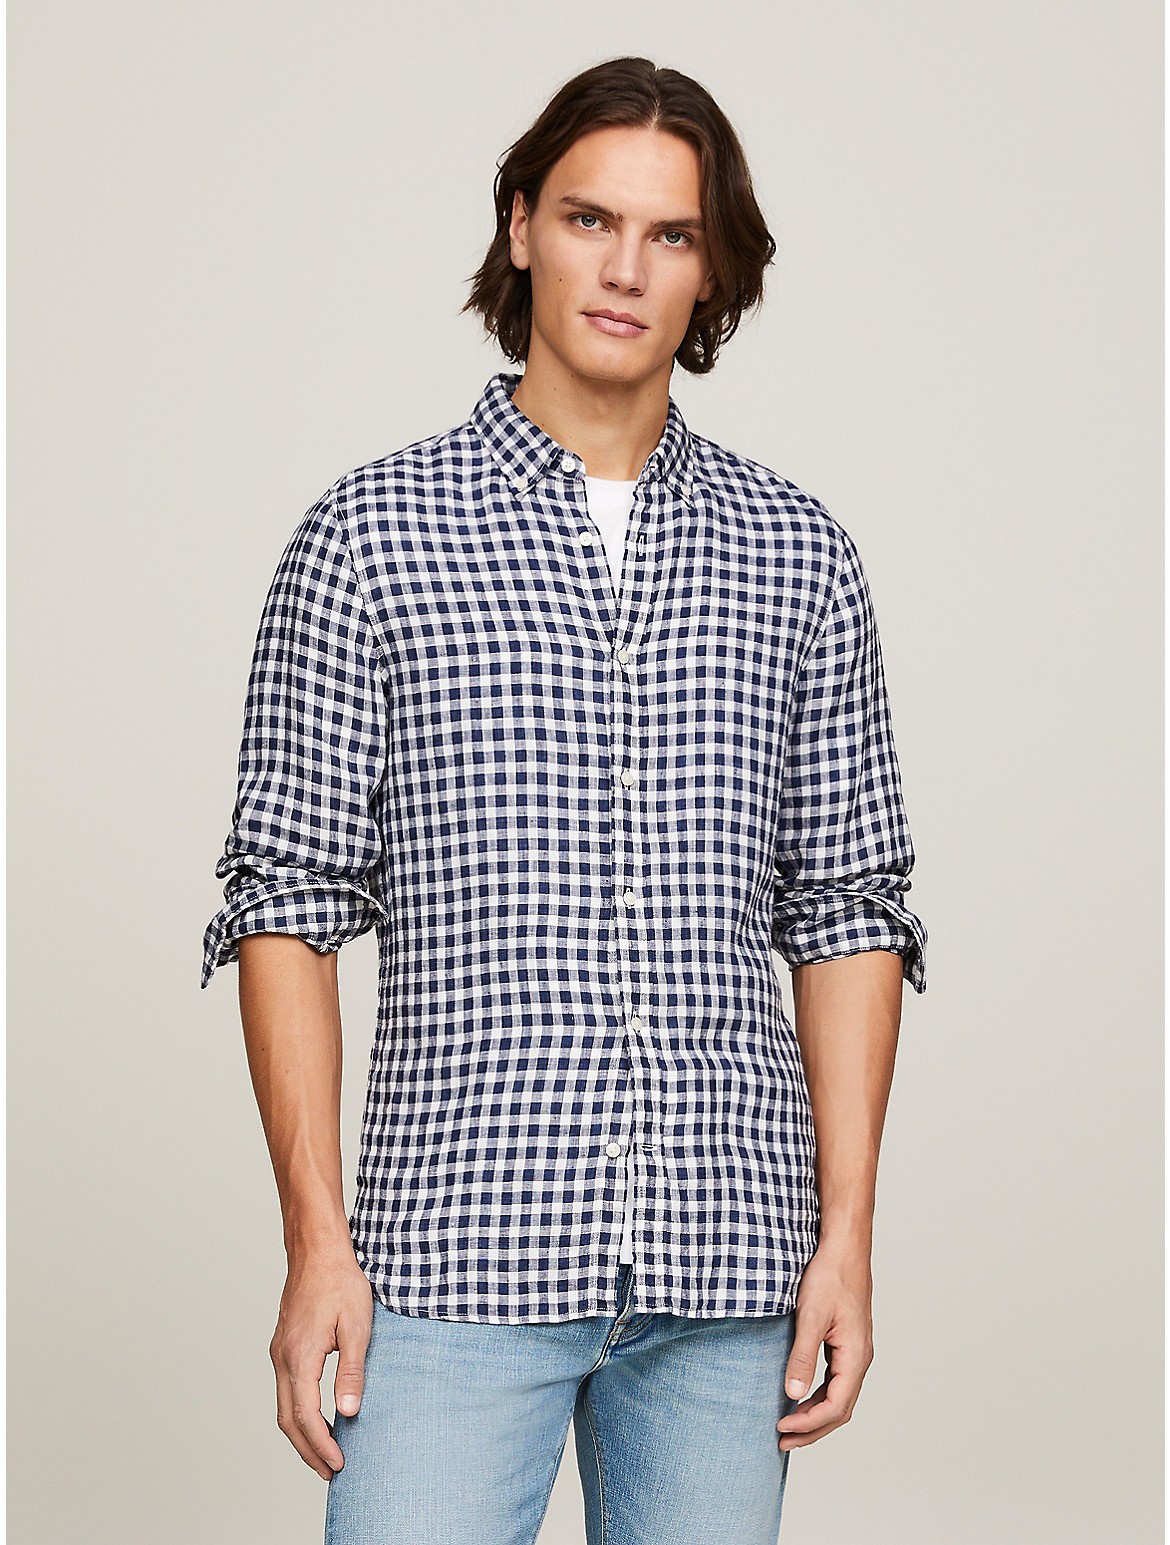 Tommy Hilfiger Slim Fit Linen Gingham Shirt In Carbon Navy/calico